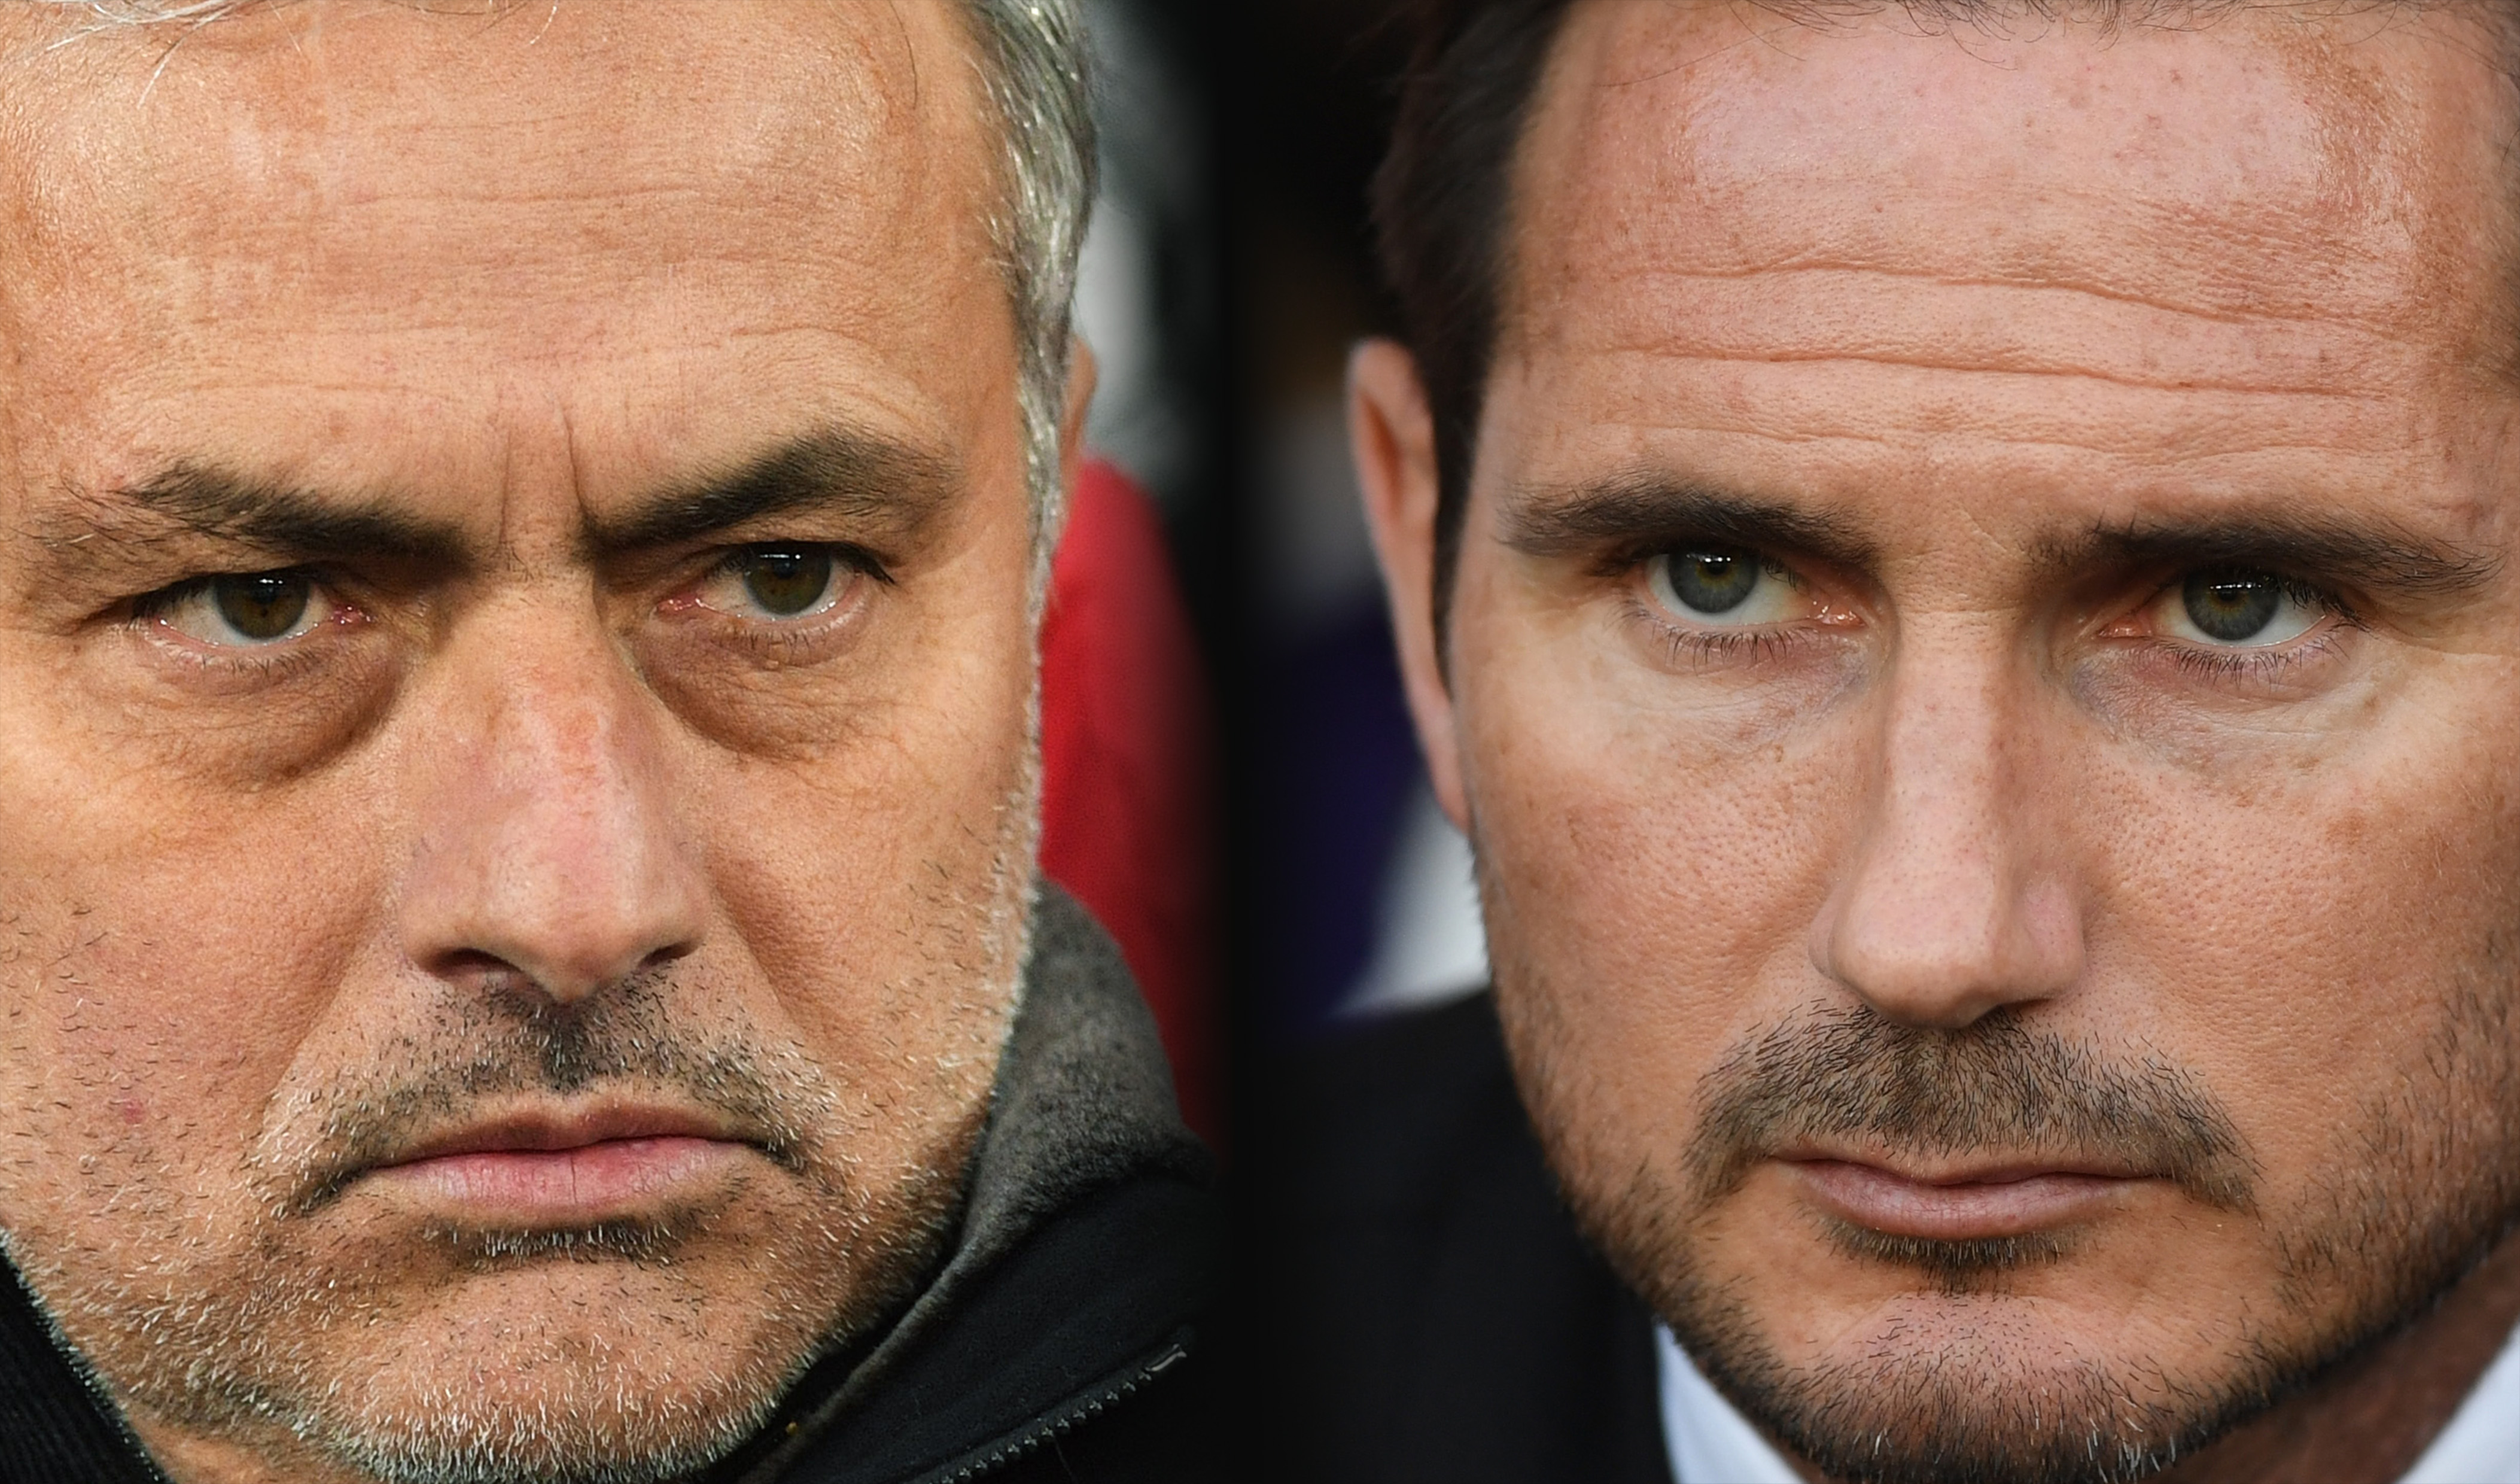 FILE PHOTO (EDITORS NOTE: COMPOSITE OF IMAGES - Image numbers 931533094,1020870870 - GRADIENT ADDED) In this composite image a comparison has been made between Jose Mourinho, Manager of Manchester United (L) and Derby manager Frank Lampard. Manchester United and Derby County meet in a Carabao Cup Third Round  on September 25, 2018 at Old Trafford in Manchester. ***LEFT IMAGE*** MANCHESTER, ENGLAND - MARCH 13: Jose Mourinho, Manager of Manchester United looks on prior to the UEFA Champions League Round of 16 Second Leg match between Manchester United and Sevilla FC at Old Trafford on March 13, 2018 in Manchester, United Kingdom. (Photo by Michael Regan/Getty Images) ***RIGHT IMAGE***  DERBY, ENGLAND - AUGUST 21: Derby manager Frank Lampard looks on during the Sky Bet Championship match between Derby County v Ipswich Town at Pride Park Stadium on August 21, 2018 in Derby, England. (Photo by Michael Regan/Getty Images)